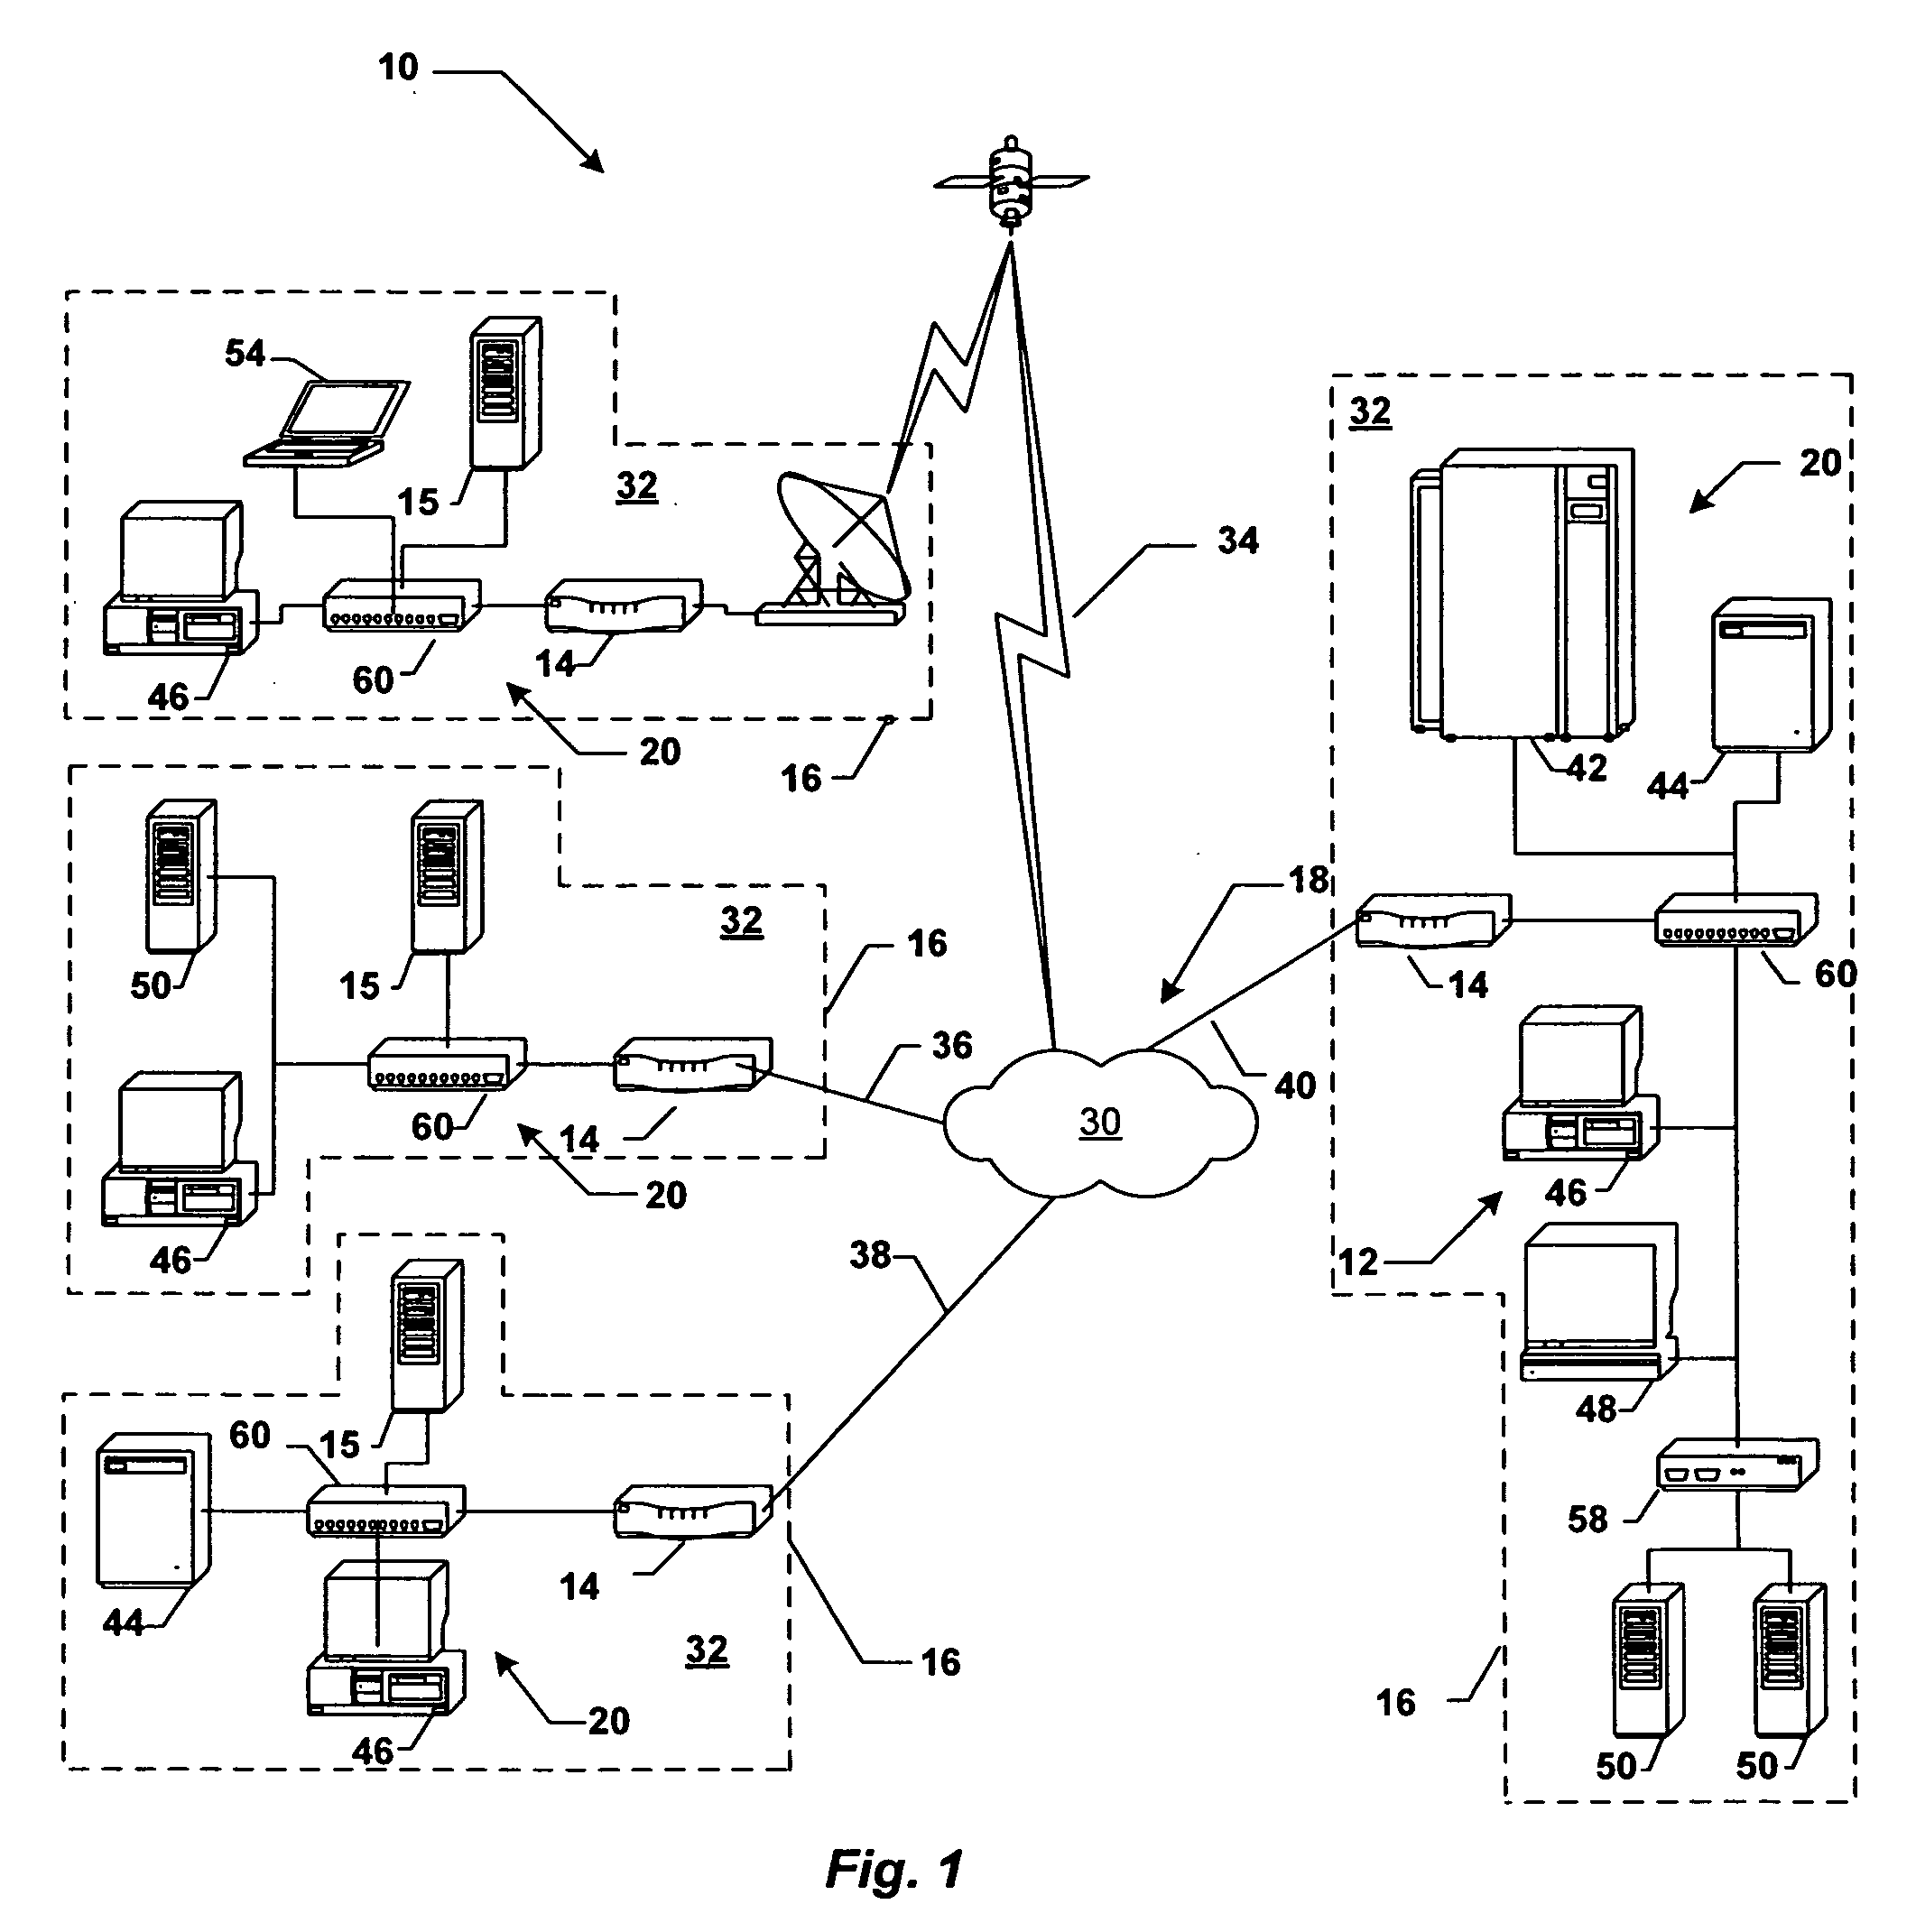 Systems, apparatus and methods for managing networking devices